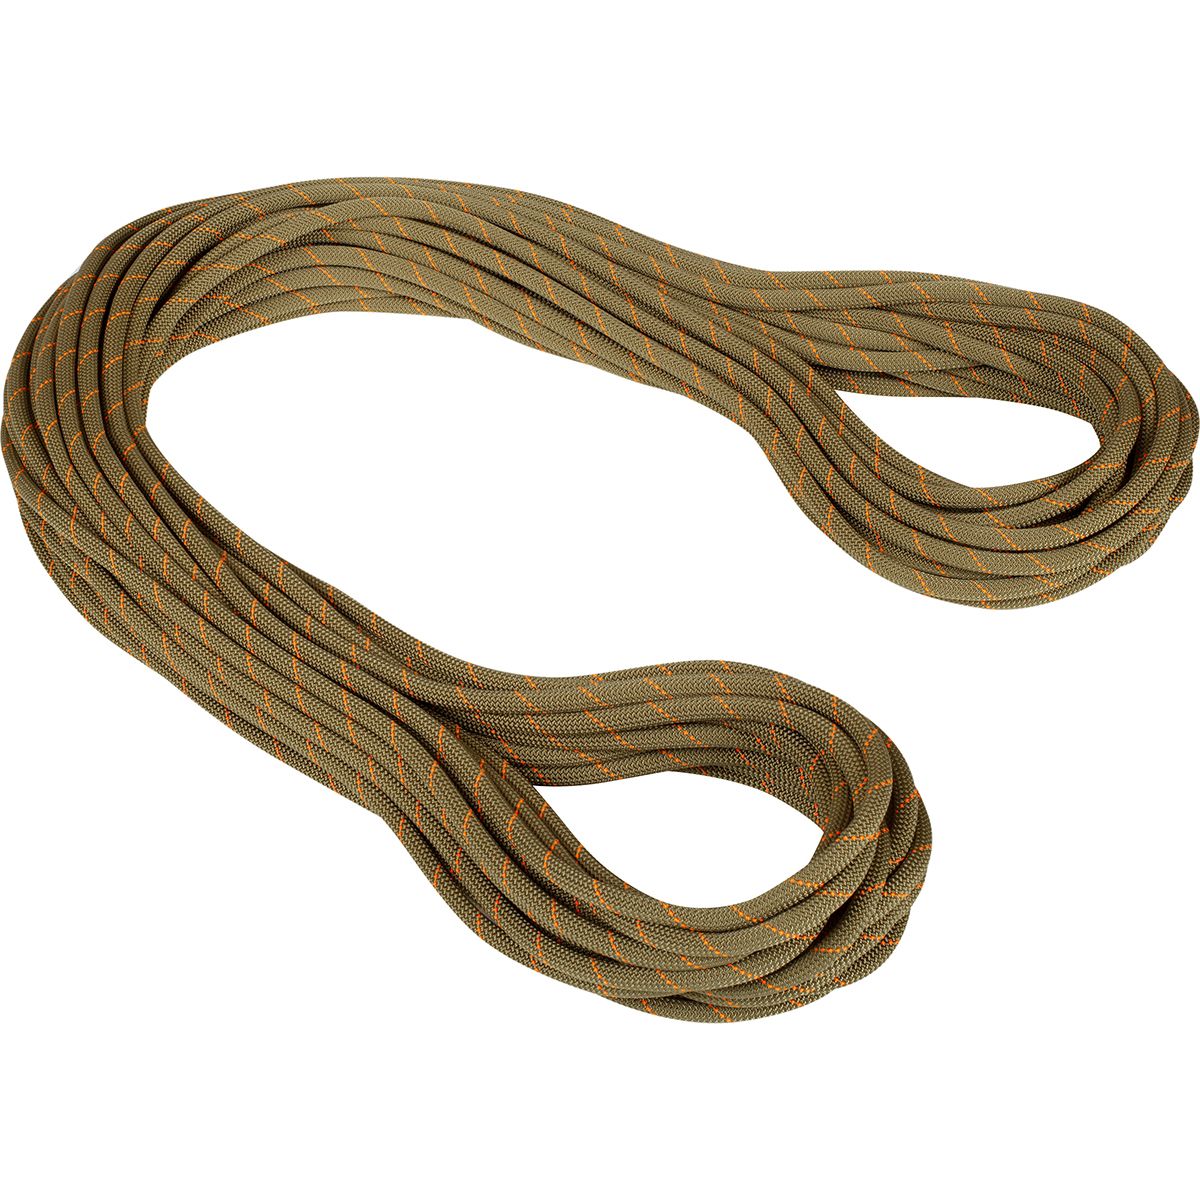 Mammut Gym Workhorse Classic Rope - 9.9mm